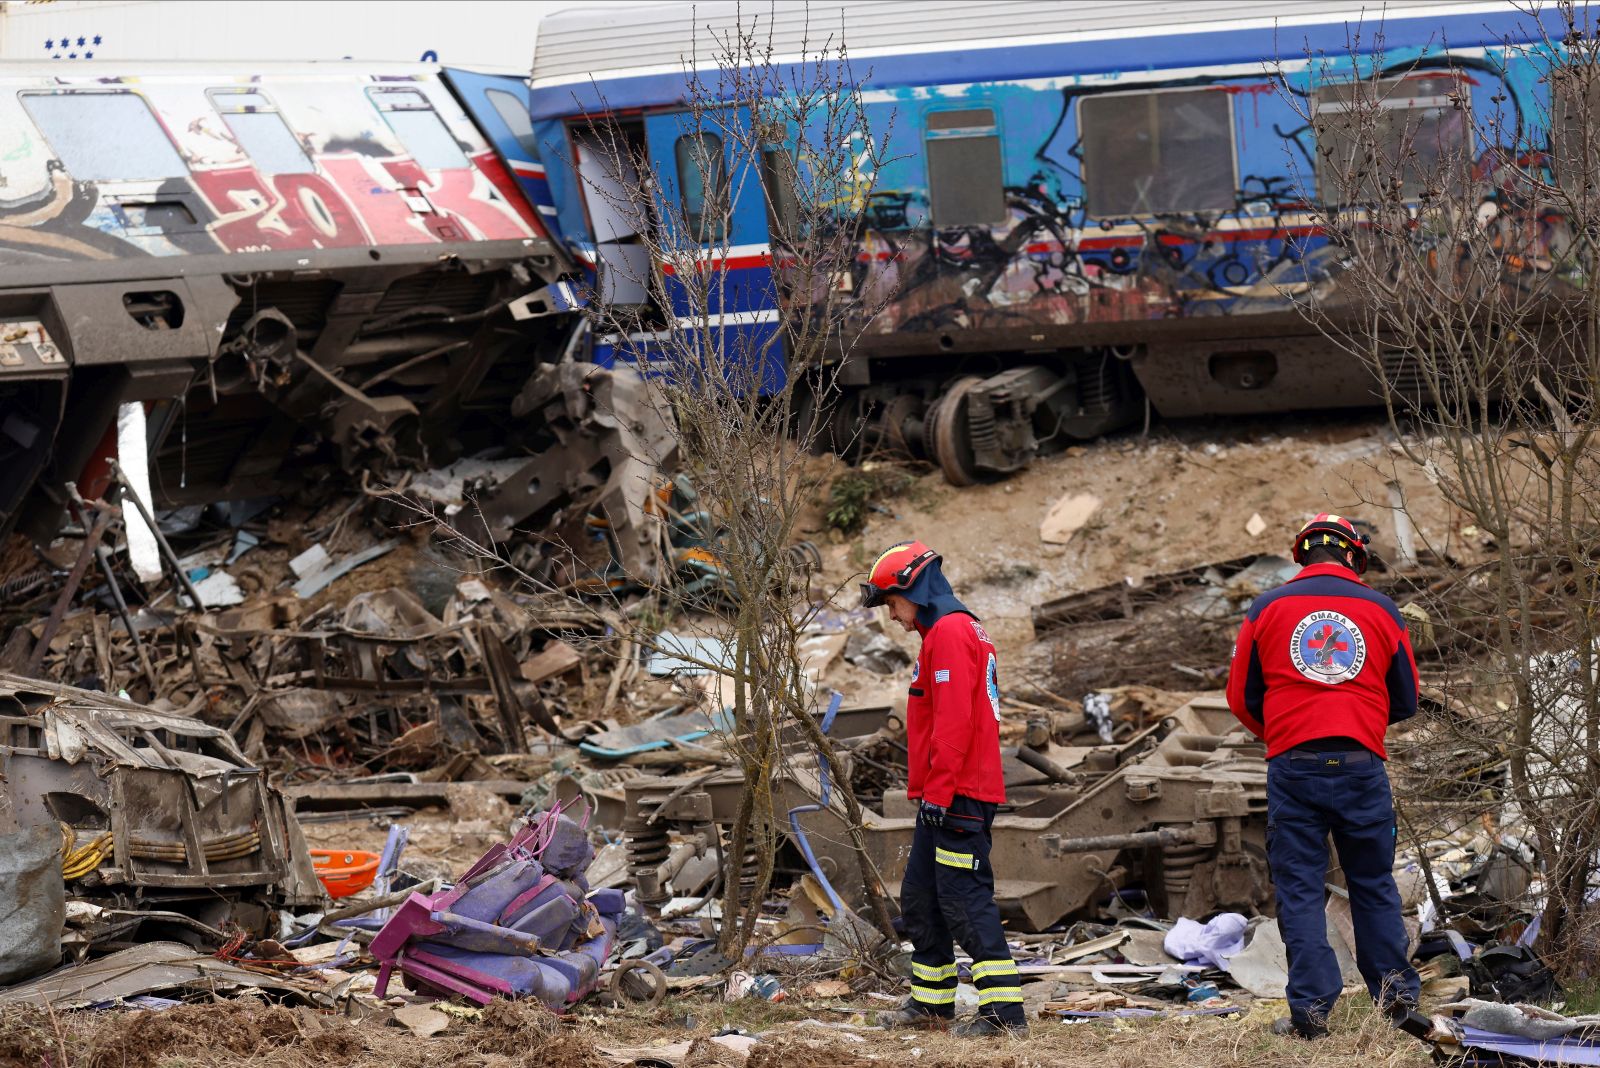 epa10497109 Rescuers at the scene of a train collision, near Larissa city, Greece, 01 March 2023. Fire fighter and ambulance service crews remain at the scene, while special crews were using cutting tools and blow torches to cut and prise apart the remains of the carriages to look for people or bodies possibly trapped inside. According to the latest update by the fire brigade spokesperson Vasilis Vathrakogiannis, the death toll was 36 so far and 66 people had been taken to hospital, six of which were admitted to ICUs.  EPA/ACHILLEAS CHIRAS